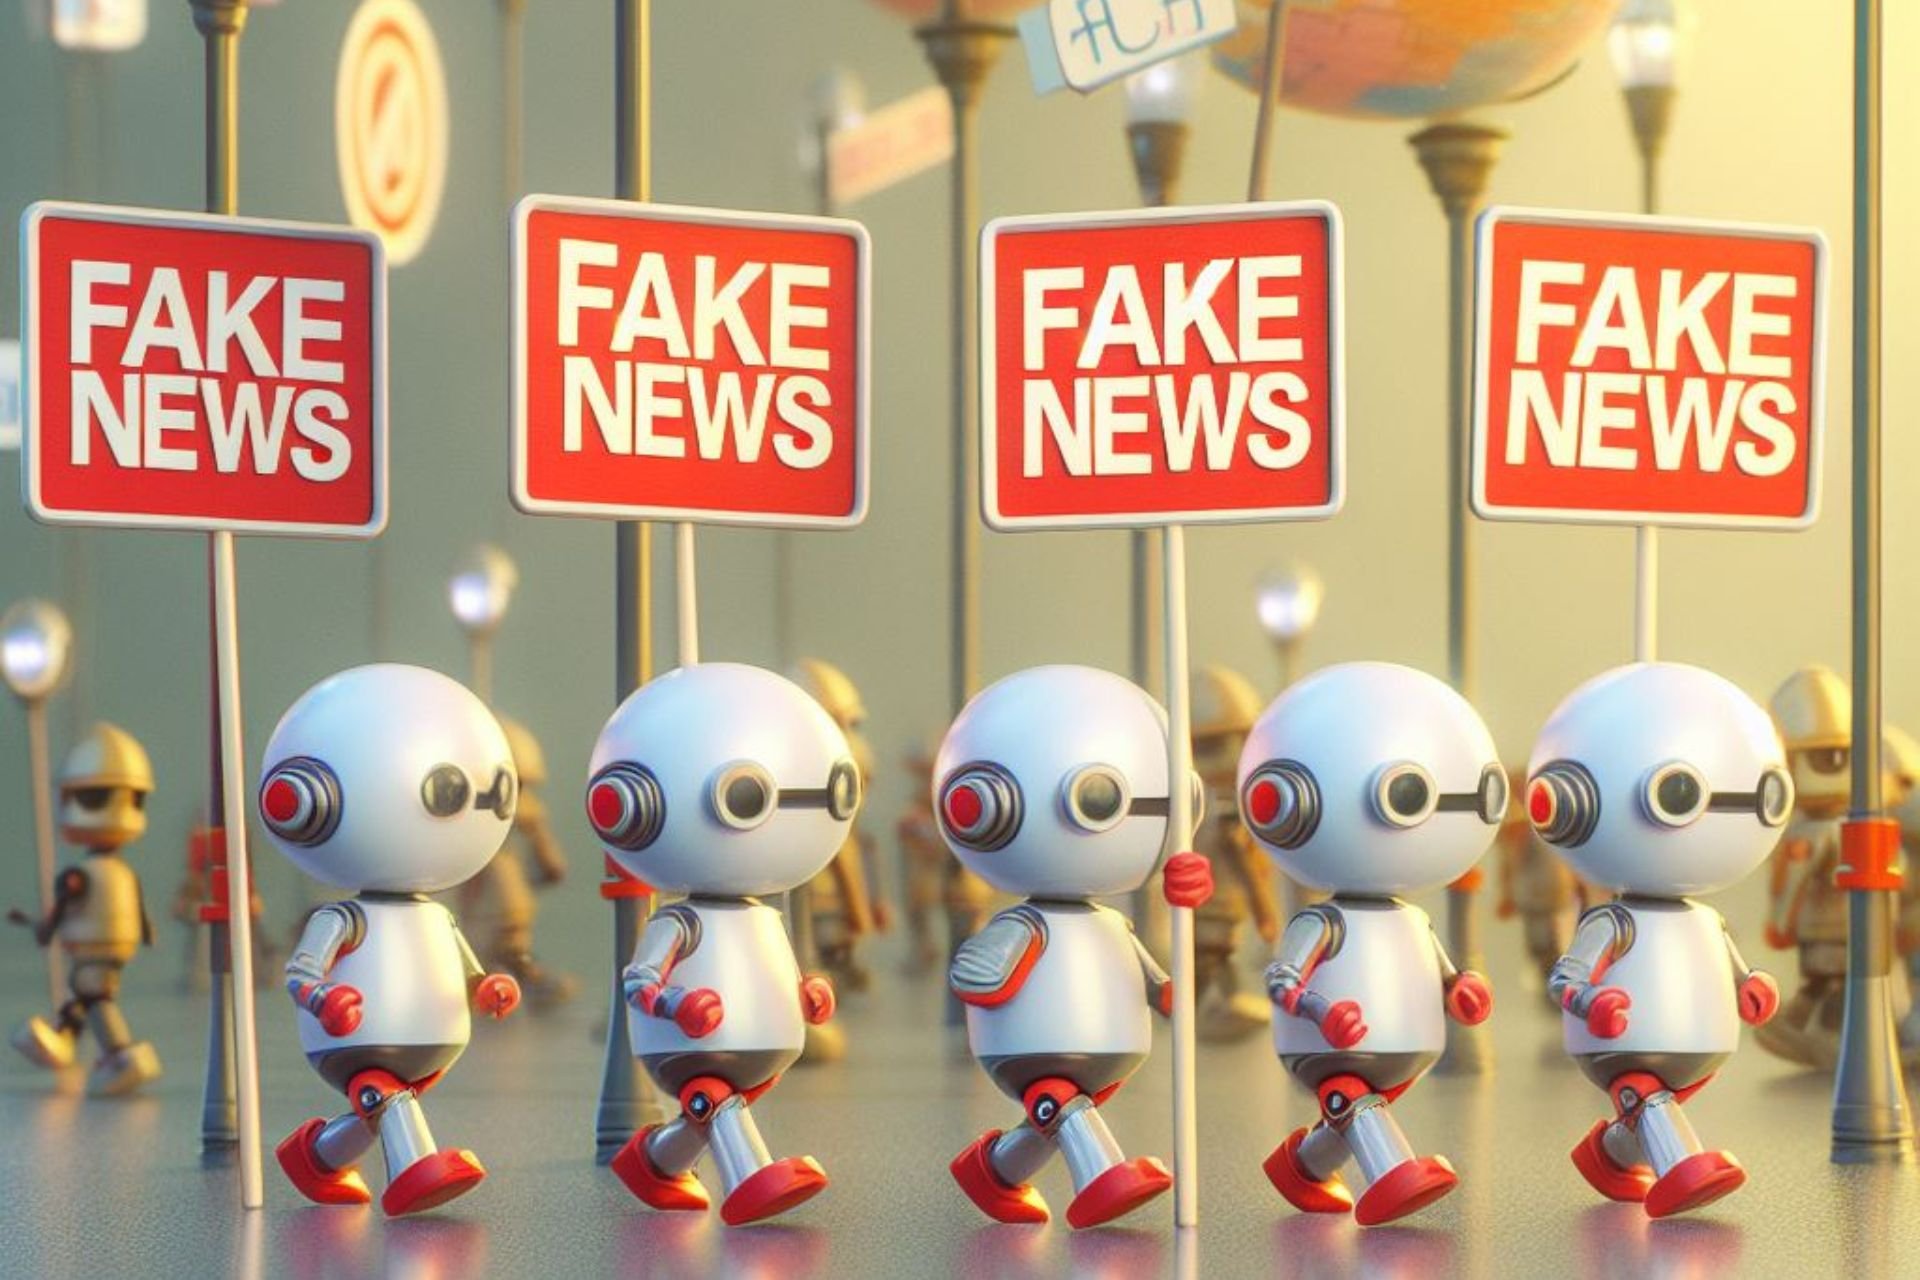 Tiny robots representing Russian and Chinese hackers spreading fake news